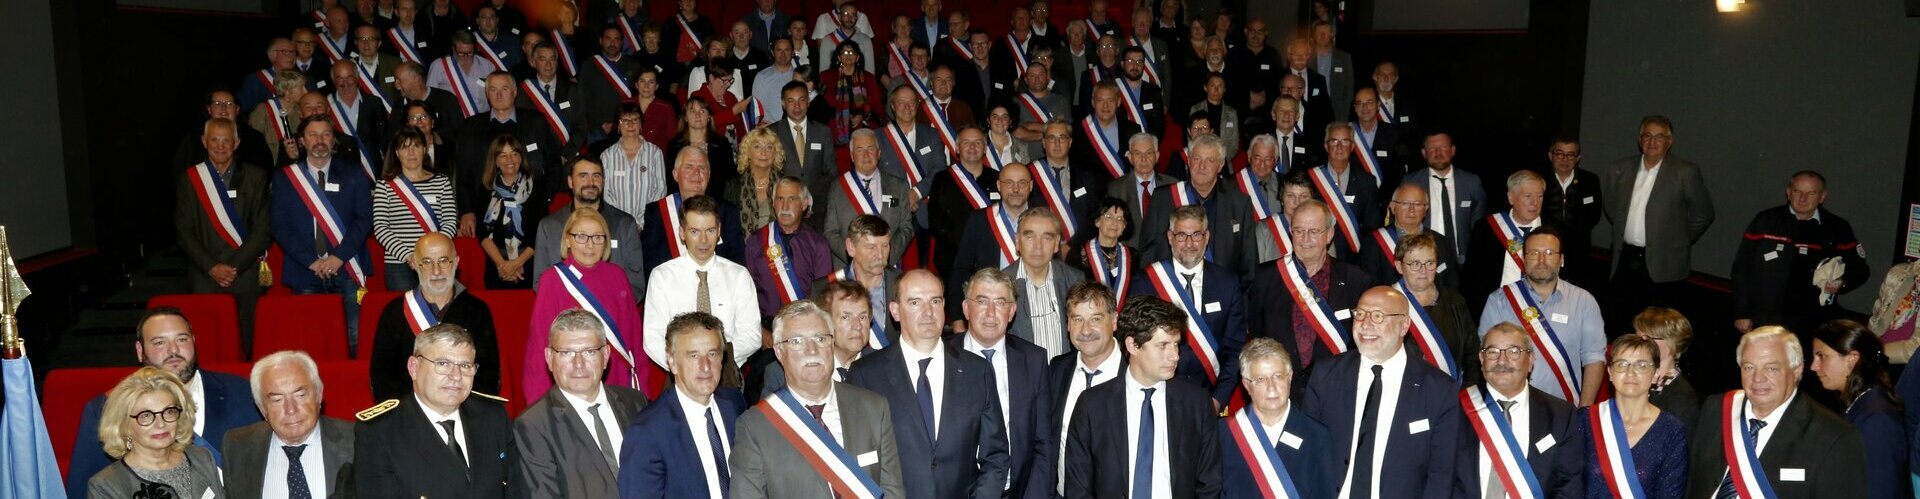 Conseil administration maires du Cantal - AMF15